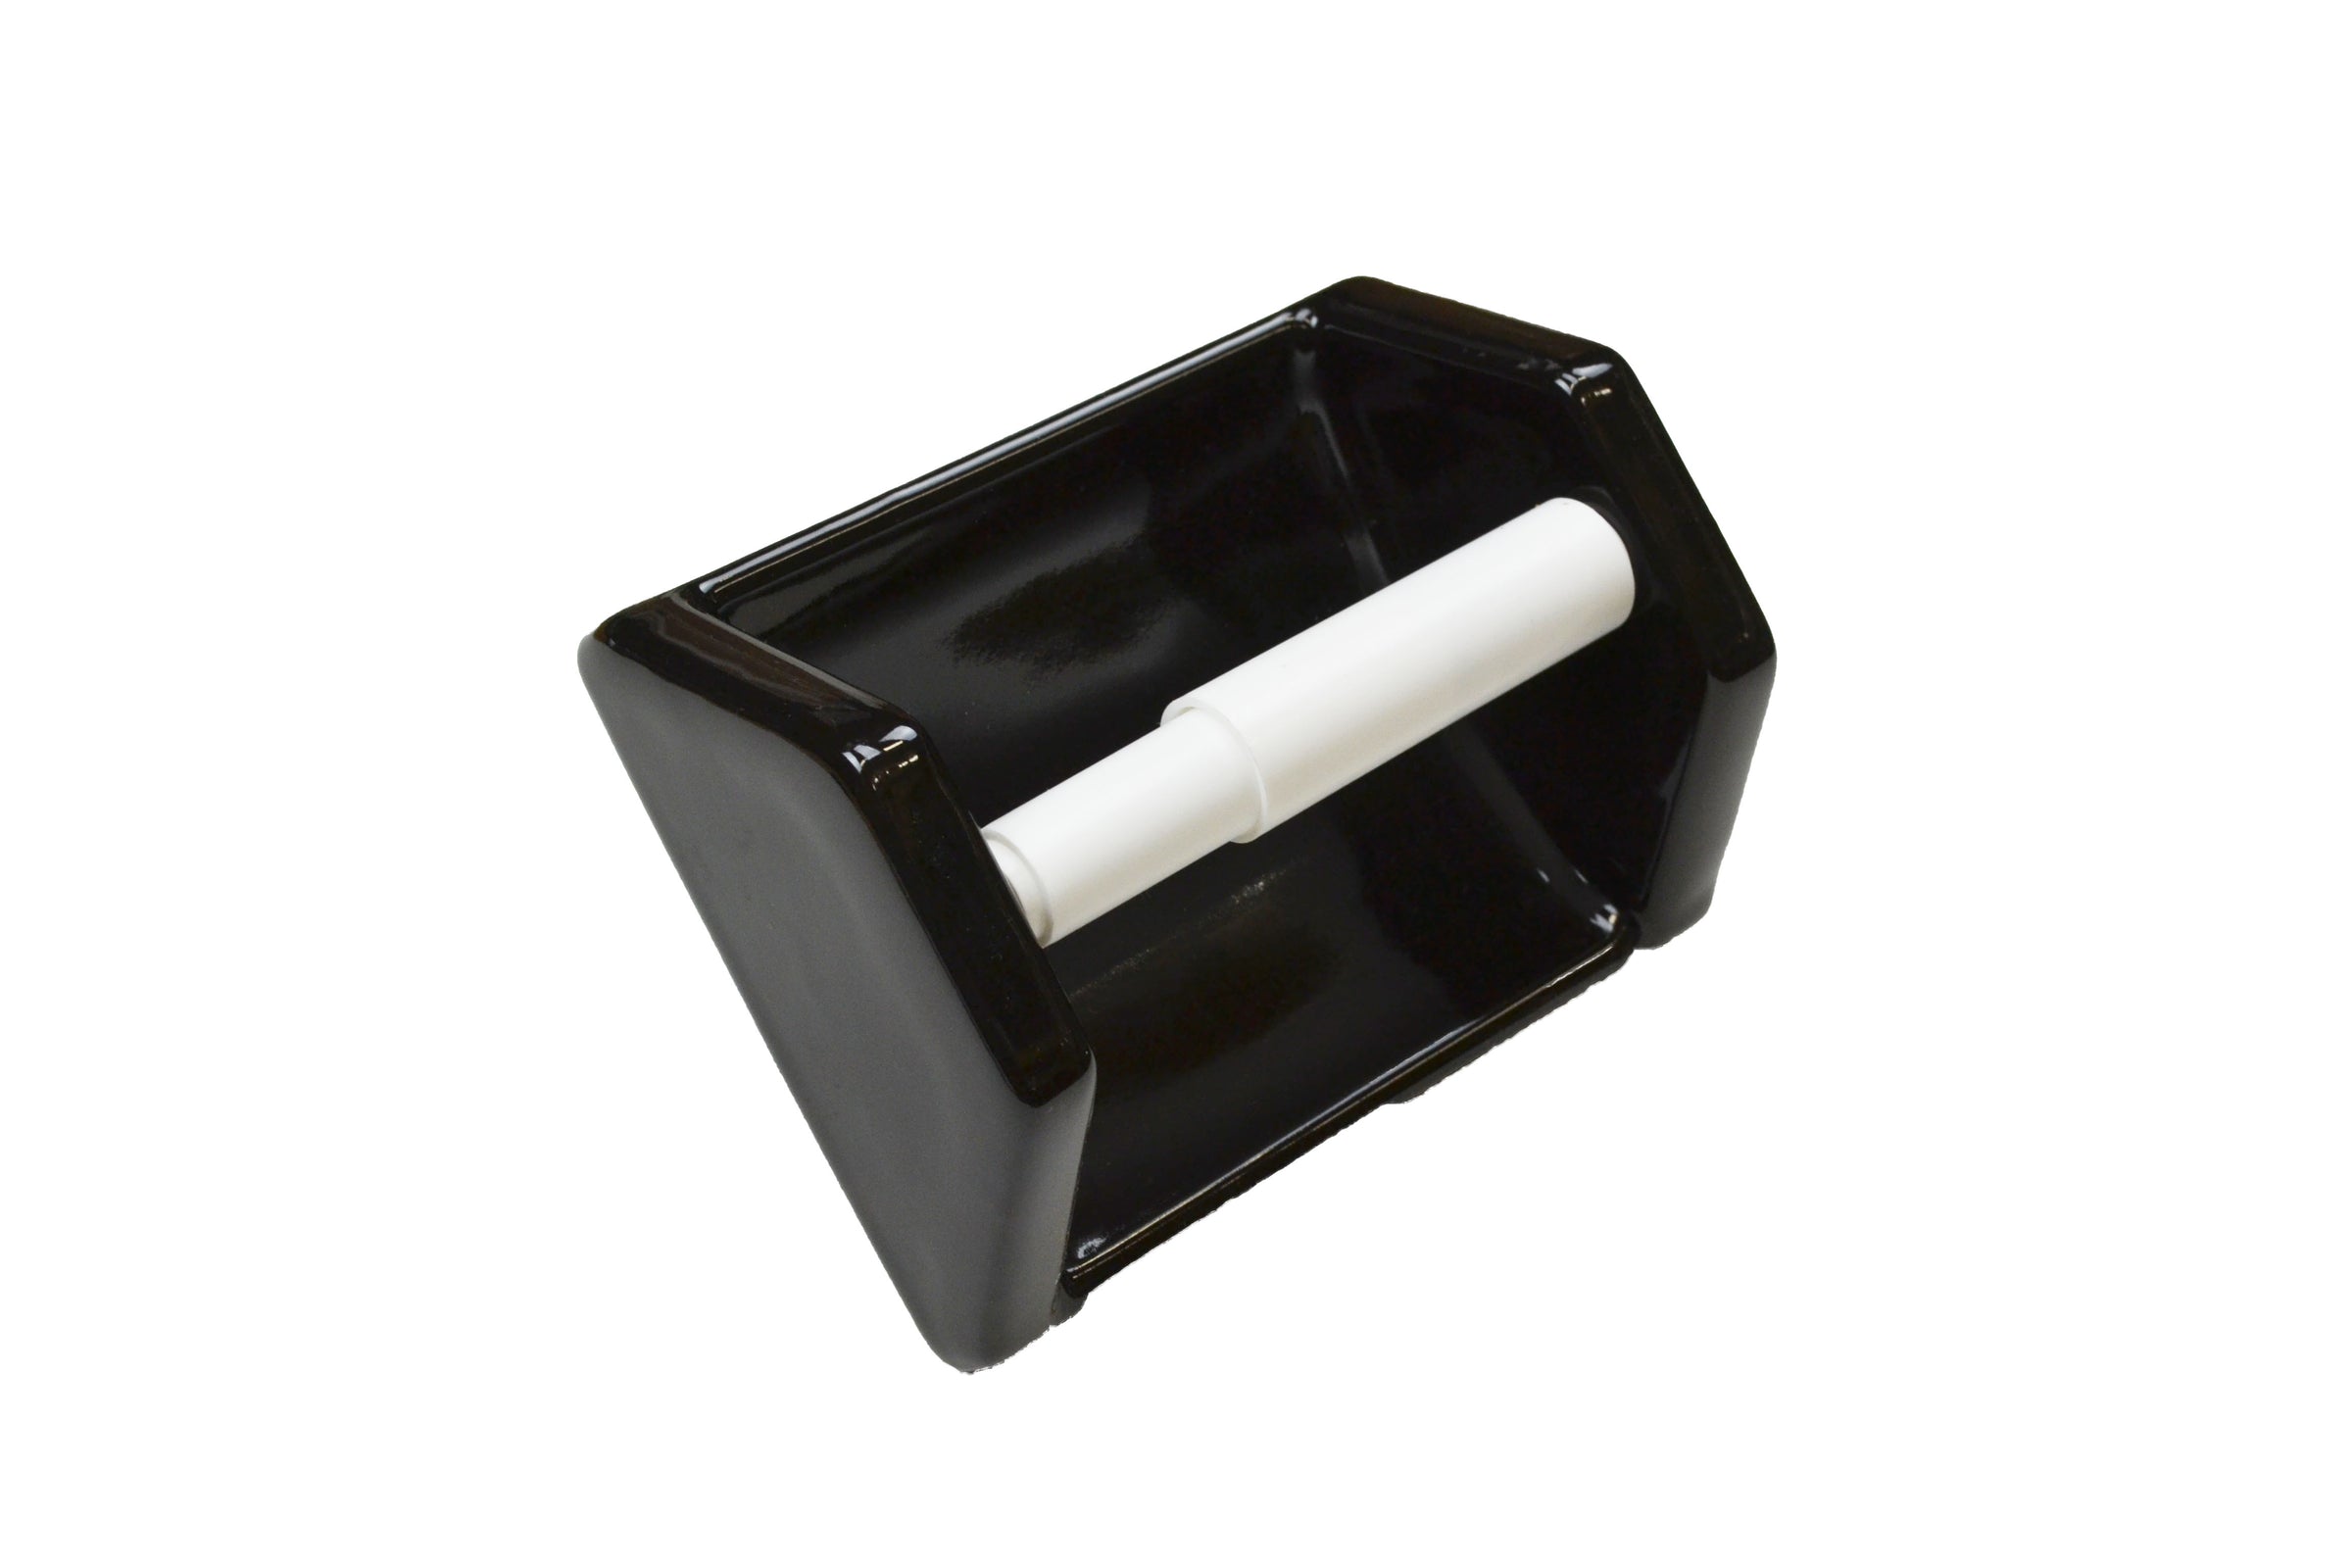 Discover our recessed porcelain roll holder